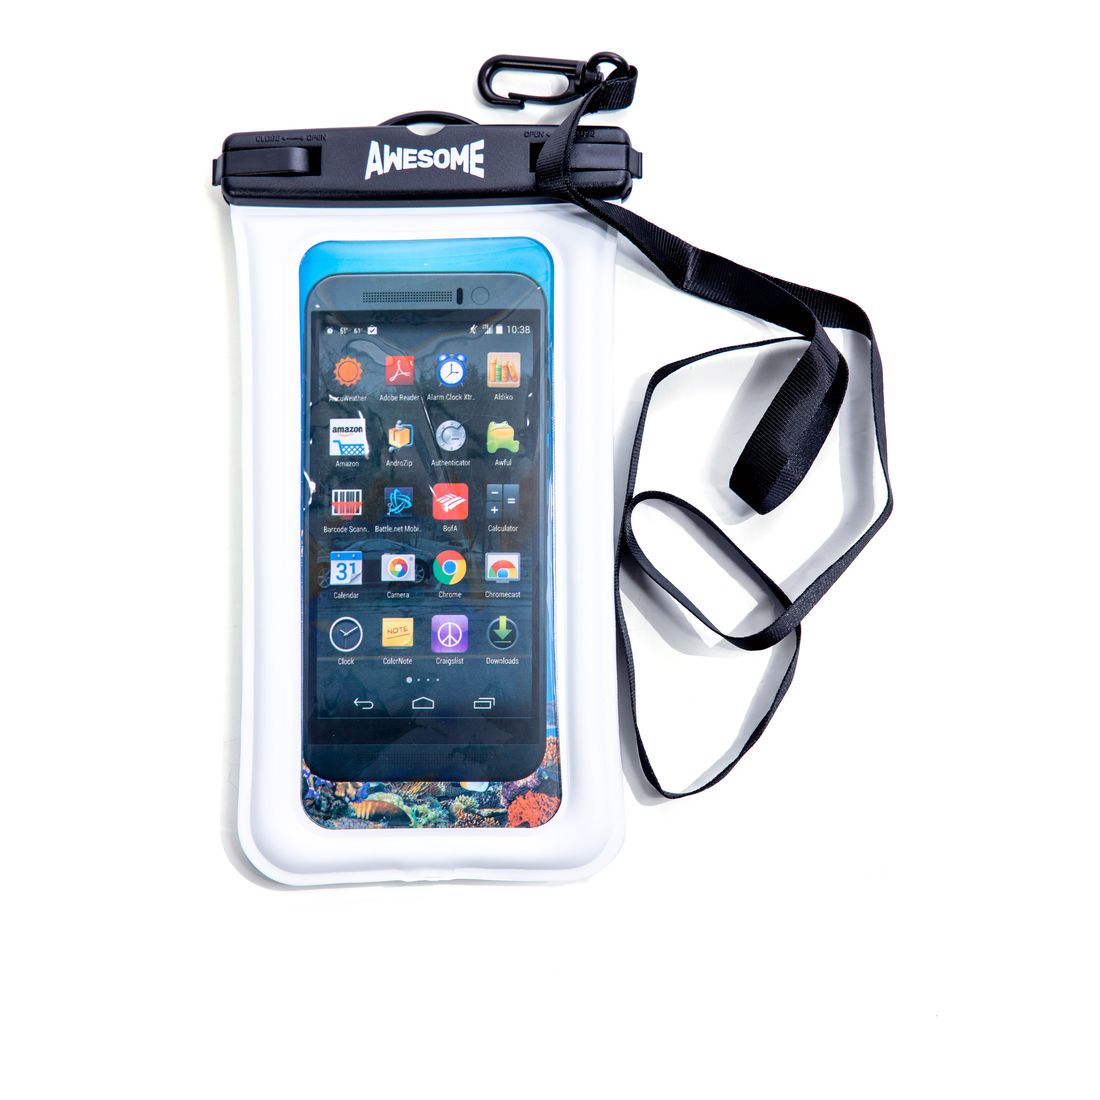 Awesome Waterproof Phone Bag Floating White